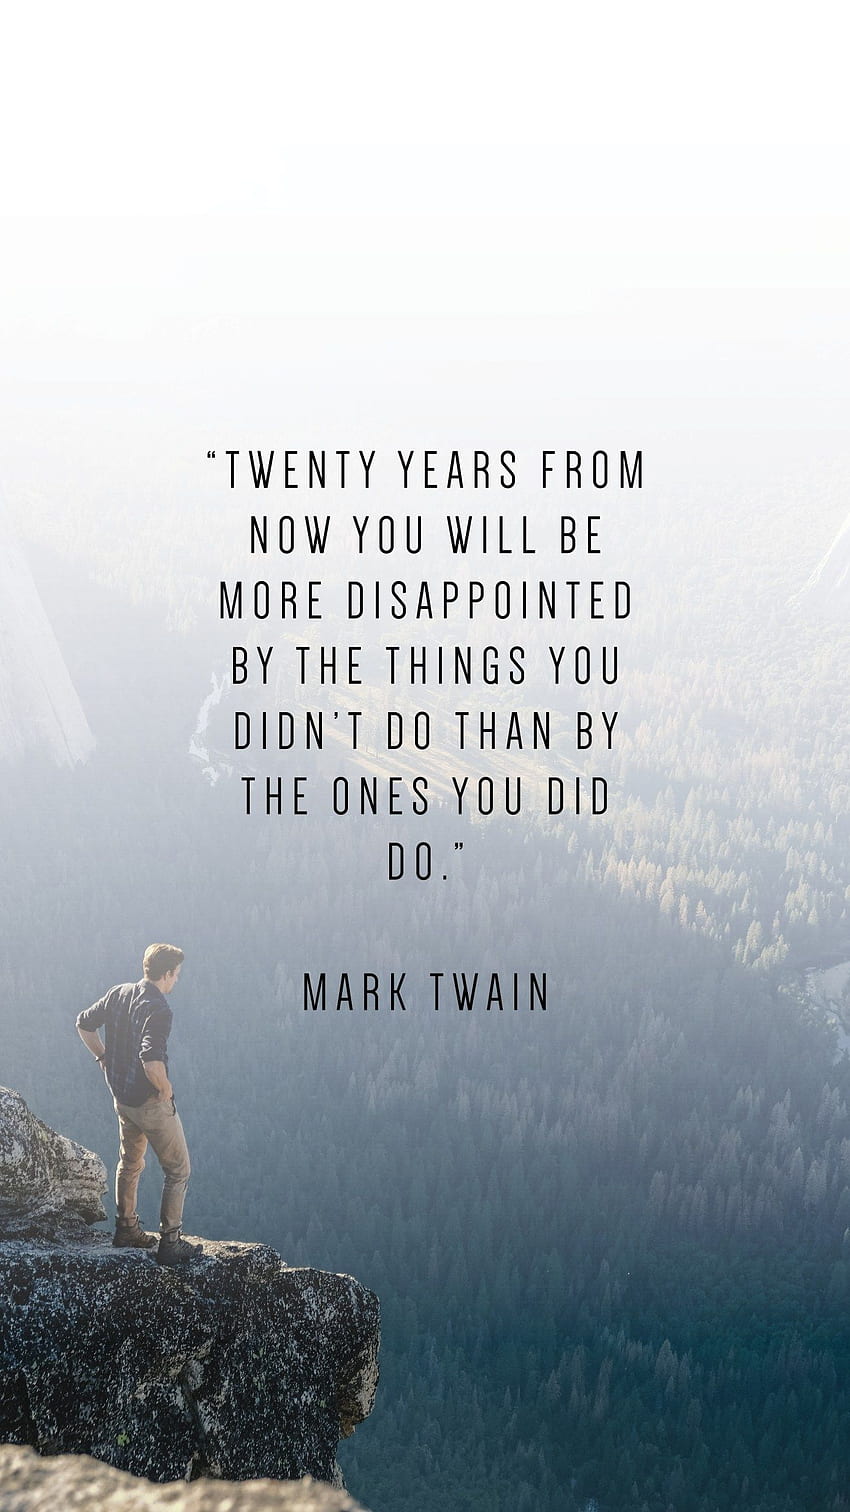 Phone To Inspire in 2020. Mark twain quotes, Chance quotes, 긍정적인 인용구 HD 전화 배경 화면